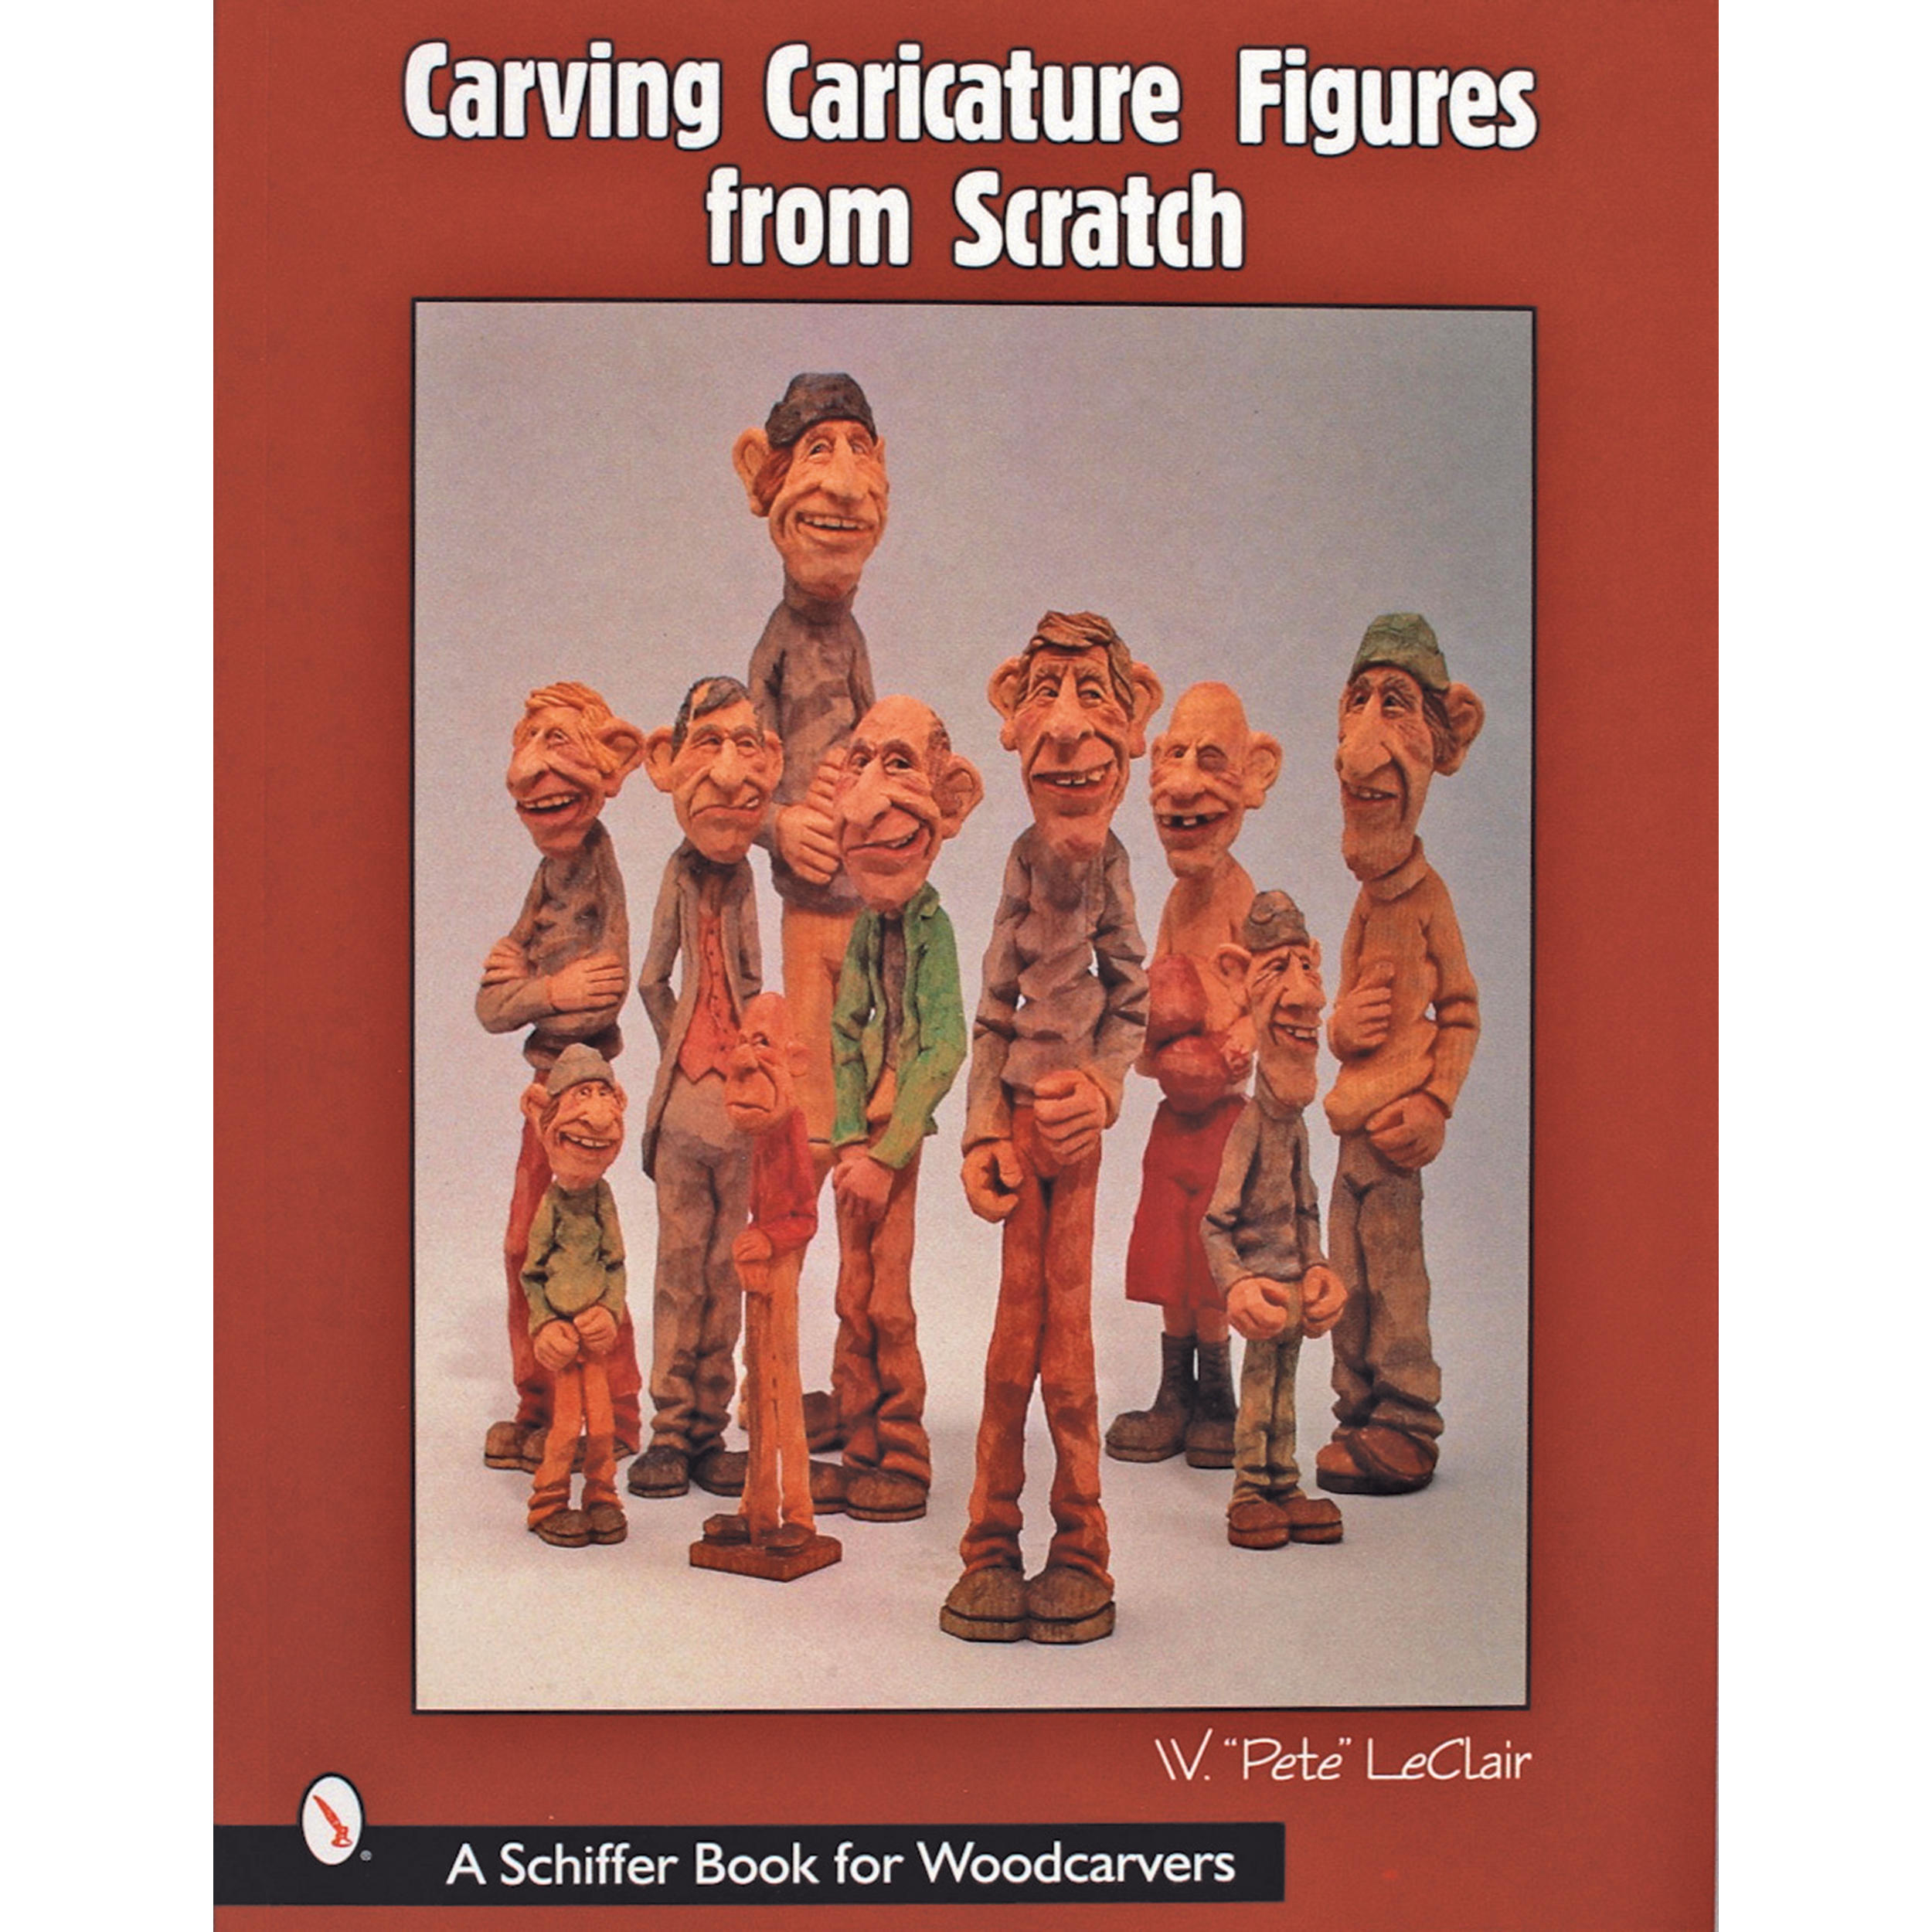 Carving Caricature Figures From Scratch